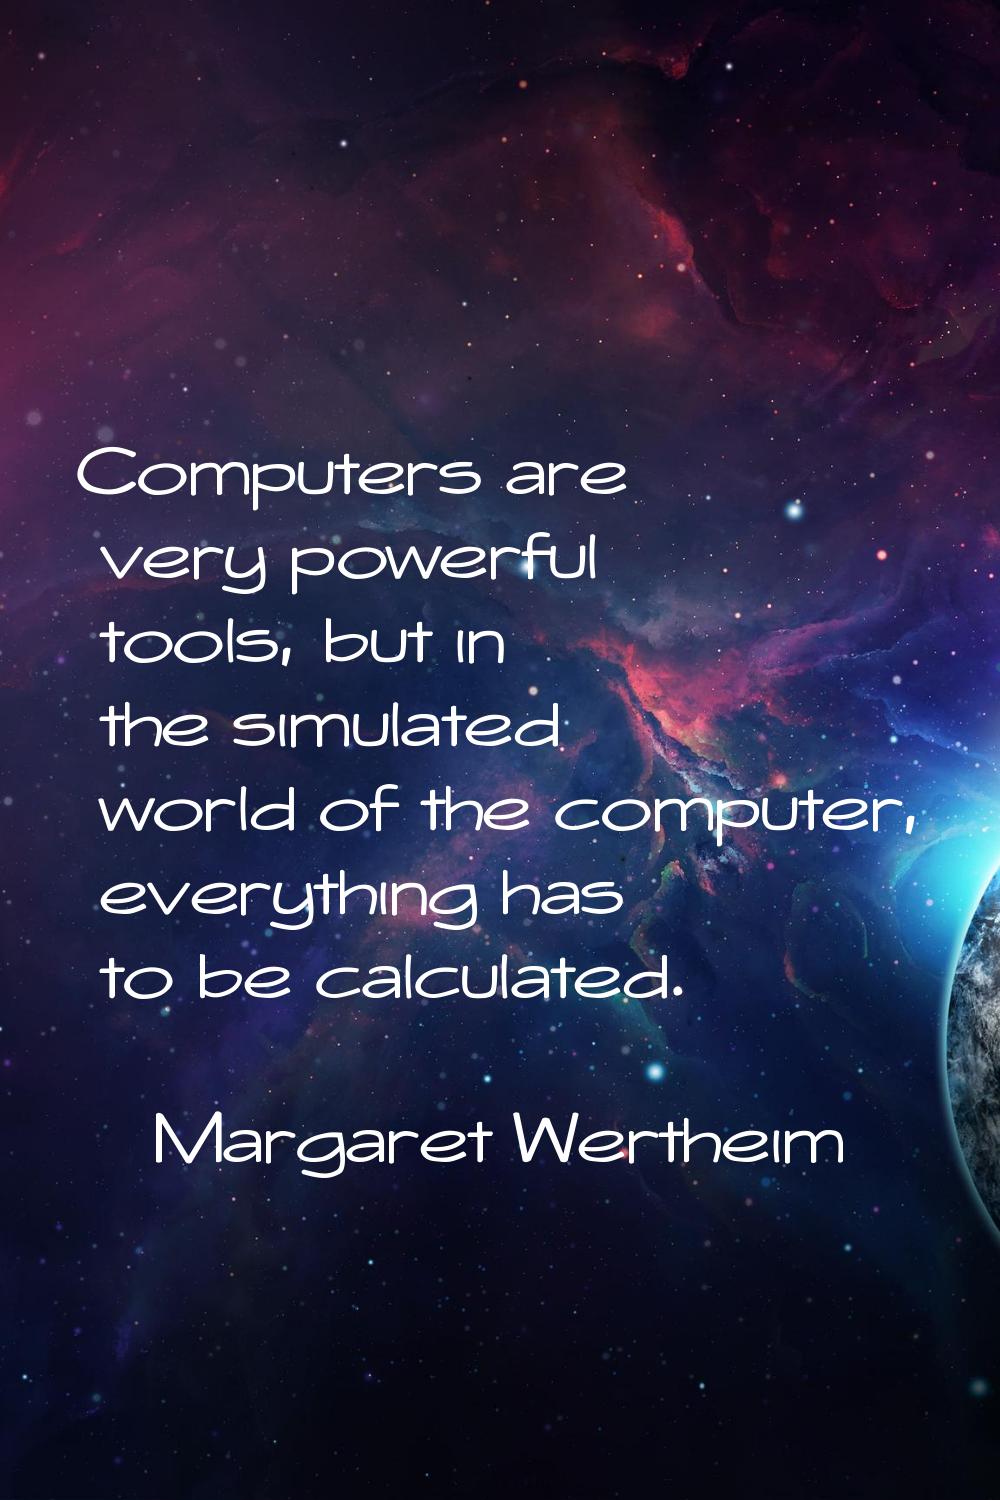 Computers are very powerful tools, but in the simulated world of the computer, everything has to be